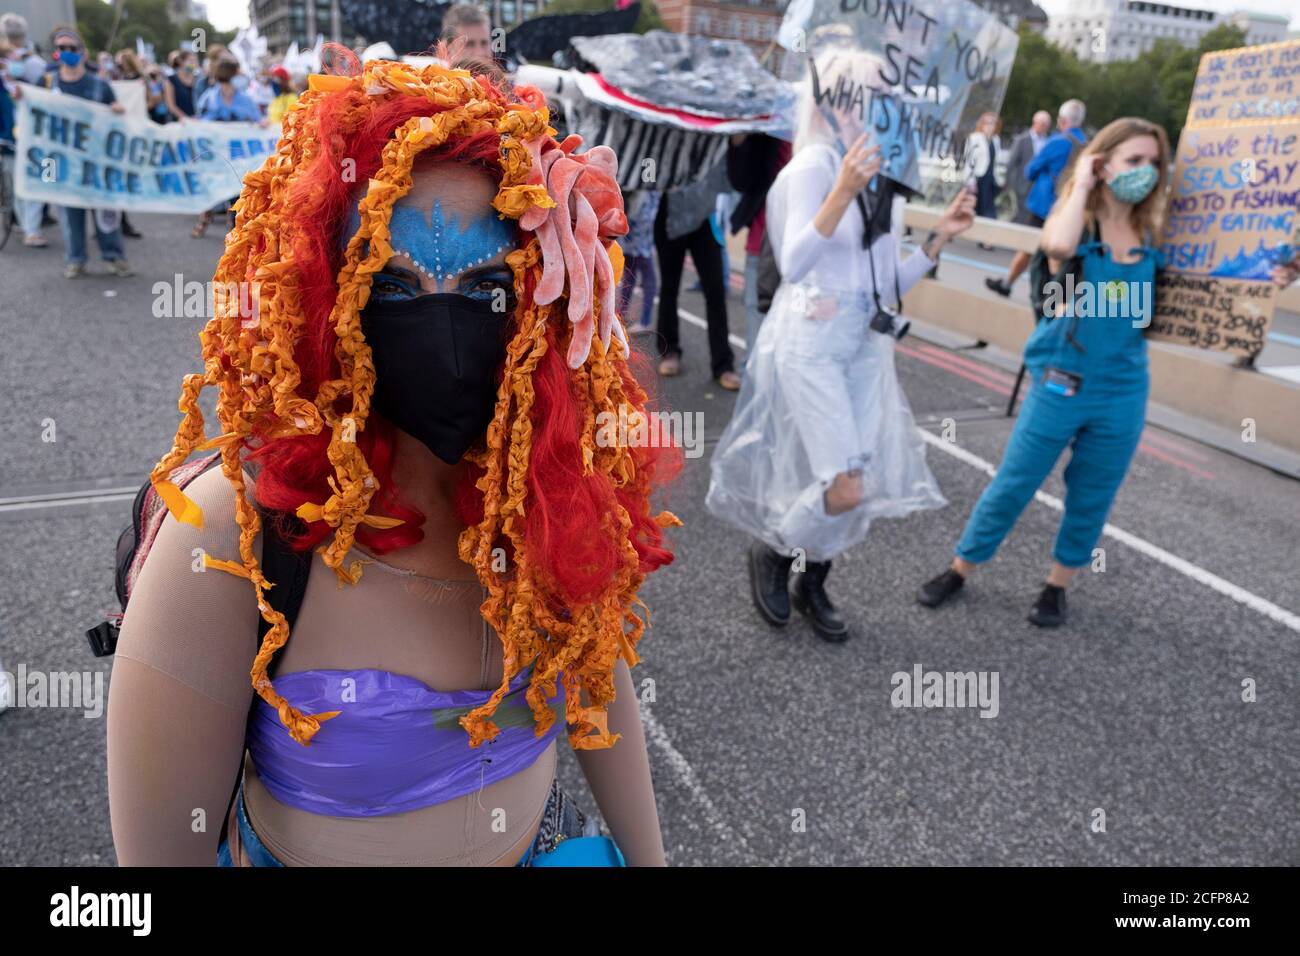 Extinction Rebellion activists at the Marine Rebellion march on 6th September 2020 in London, United Kingdom. Ocean Rebellion, Sea Life Extinction, Animal Rebellion and Extinction Rebellion joined together to celebrate the biodiversity found in our seas, and to grieve at the destruction of the Earth’s oceans and marine life due to climate breakdown and human interference, and the loss of lives, homes and livelihoods from rising sea levels. Extinction Rebellion is a climate change group started in 2018 and has gained a huge following of people committed to peaceful protests. These protests are Stock Photo